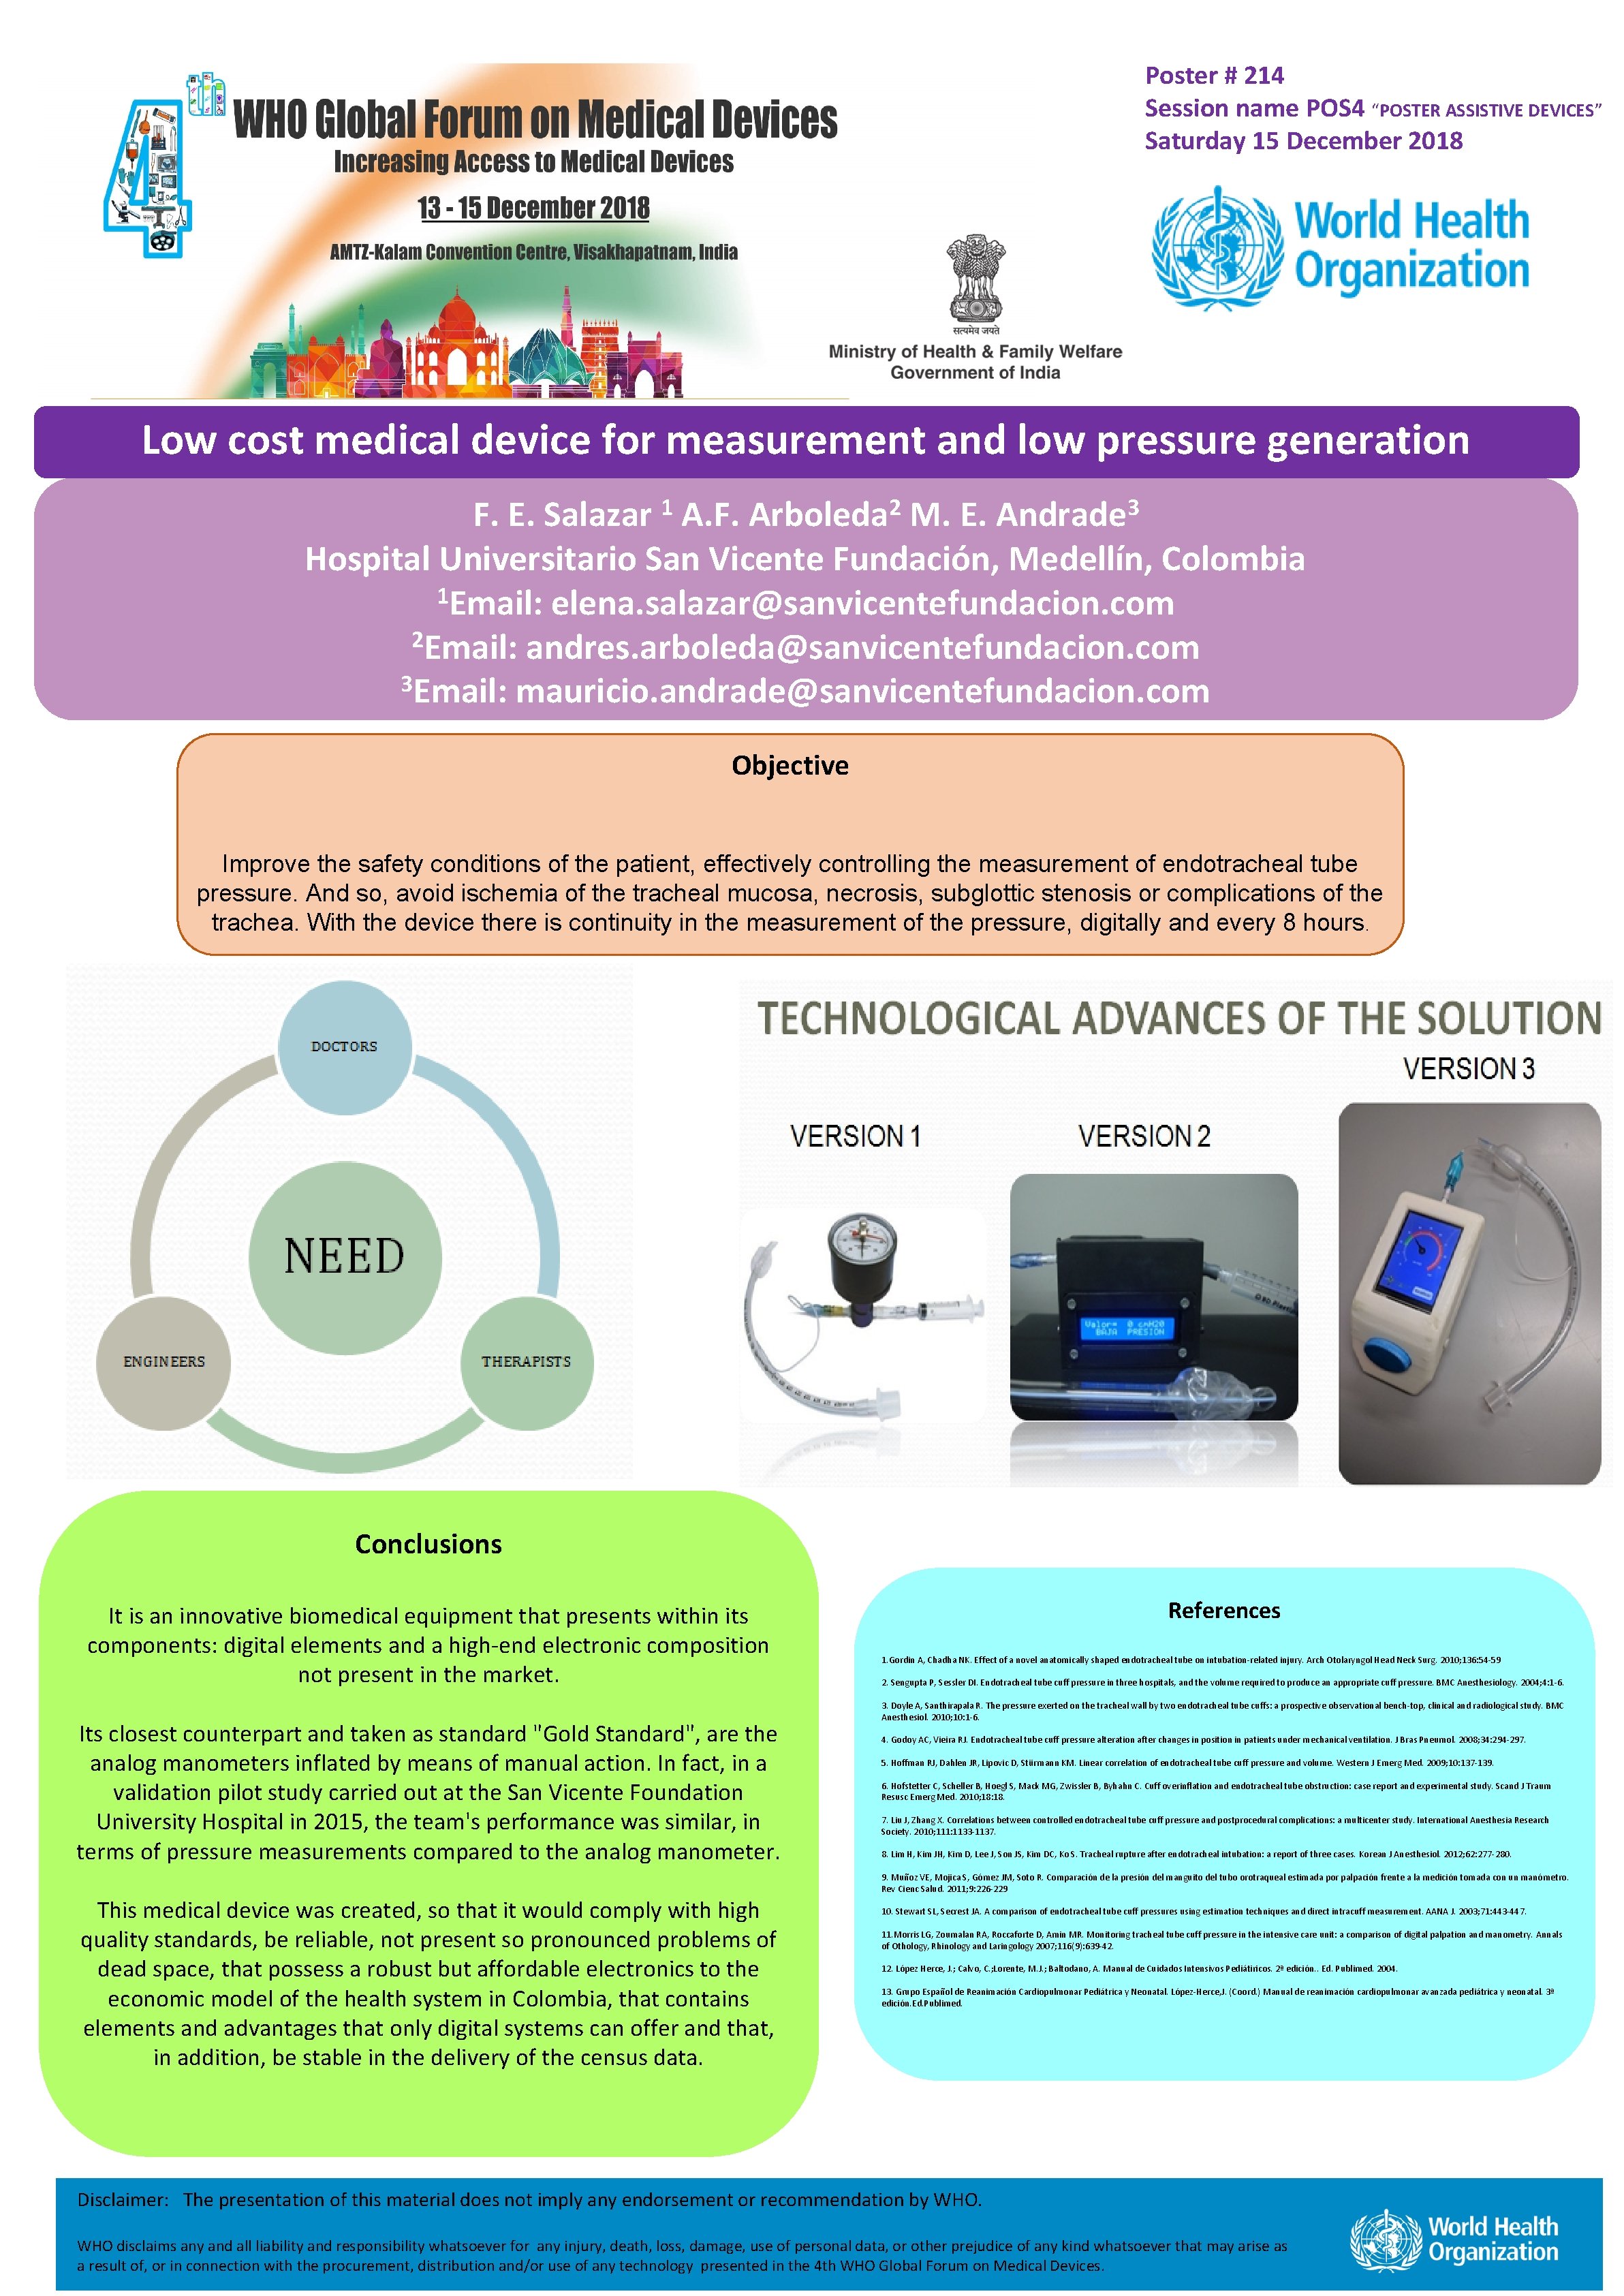 Poster # 214 Session name POS 4 “POSTER ASSISTIVE DEVICES” Saturday 15 December 2018